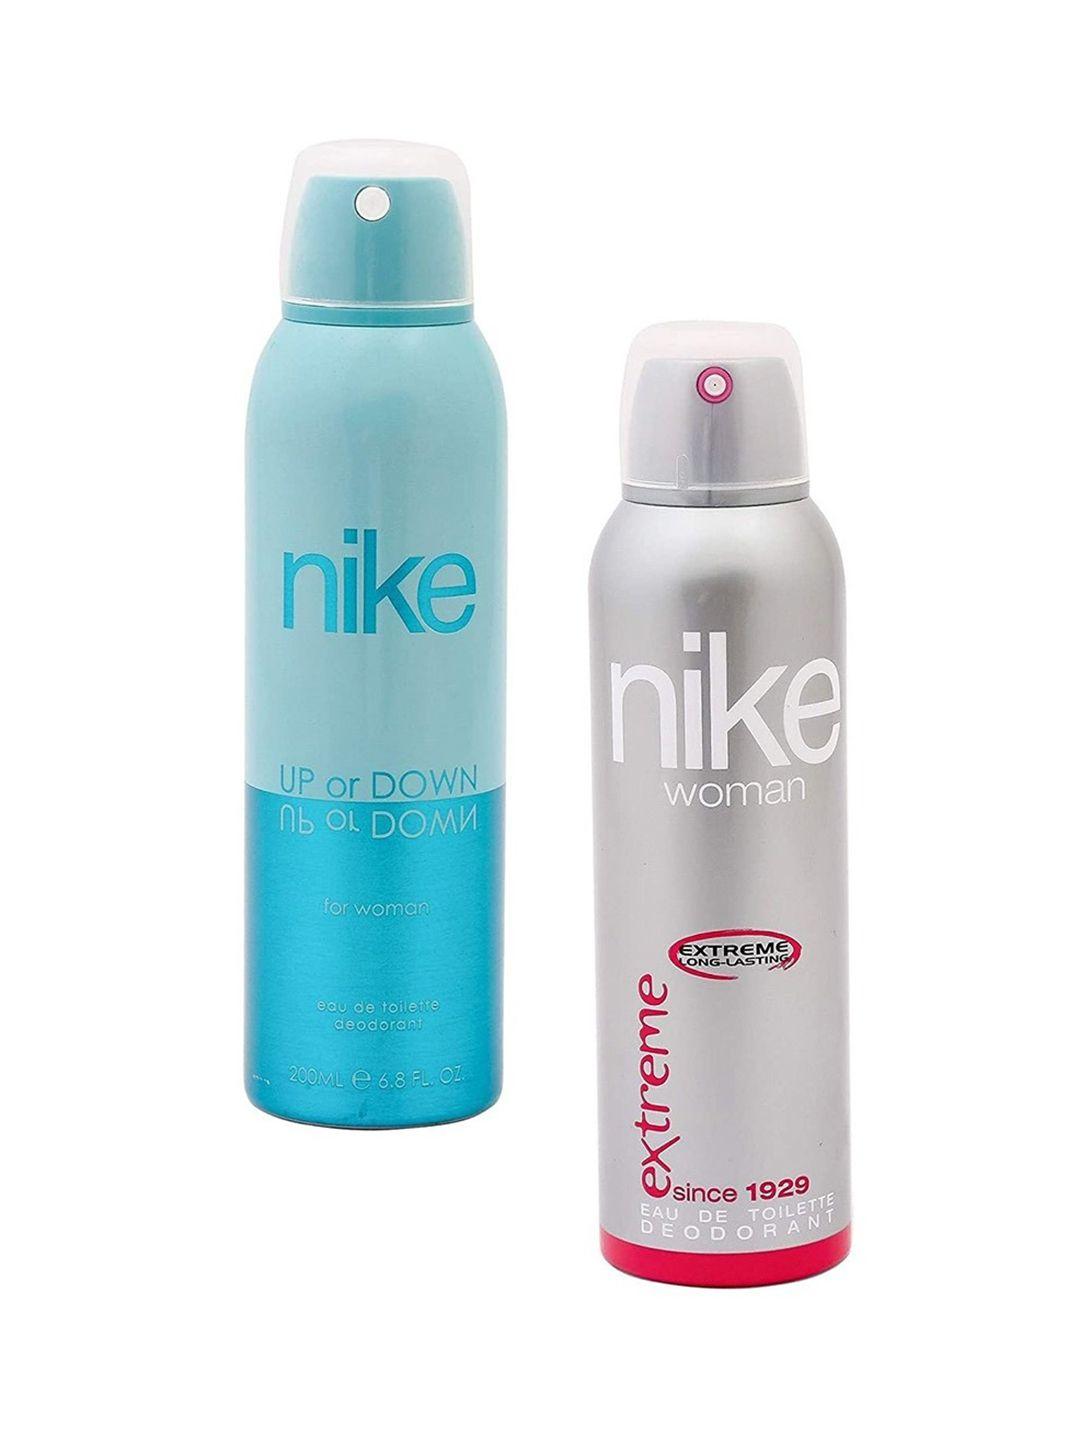 nike pack of 2 woman up or down/extreme deodorant - 200 ml each